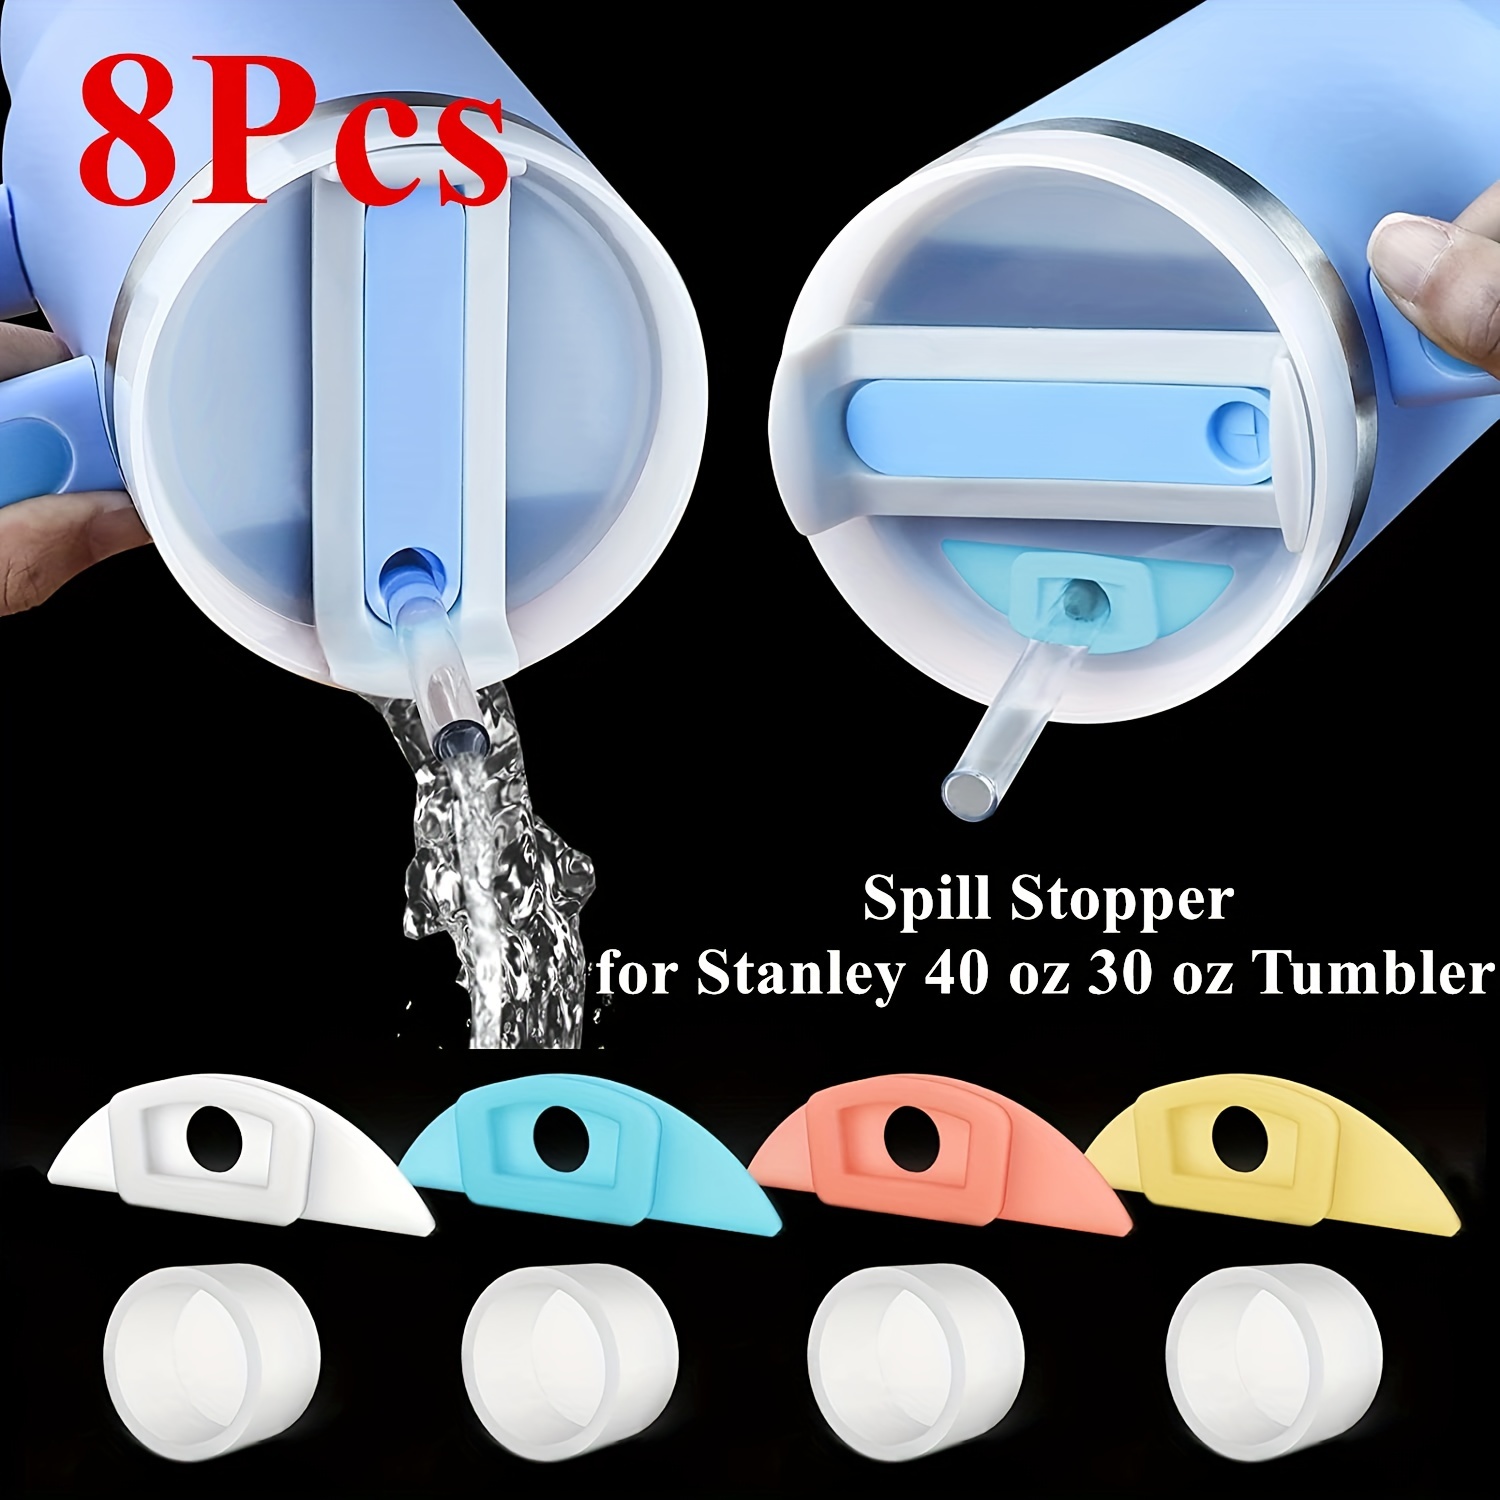 8 Pack Silicone Spill Proof Stopper Compatible For Stanley Cup 1.0/2.0  40oz/ 30oz Tumbler Water Cup Anti Leakage Accessories